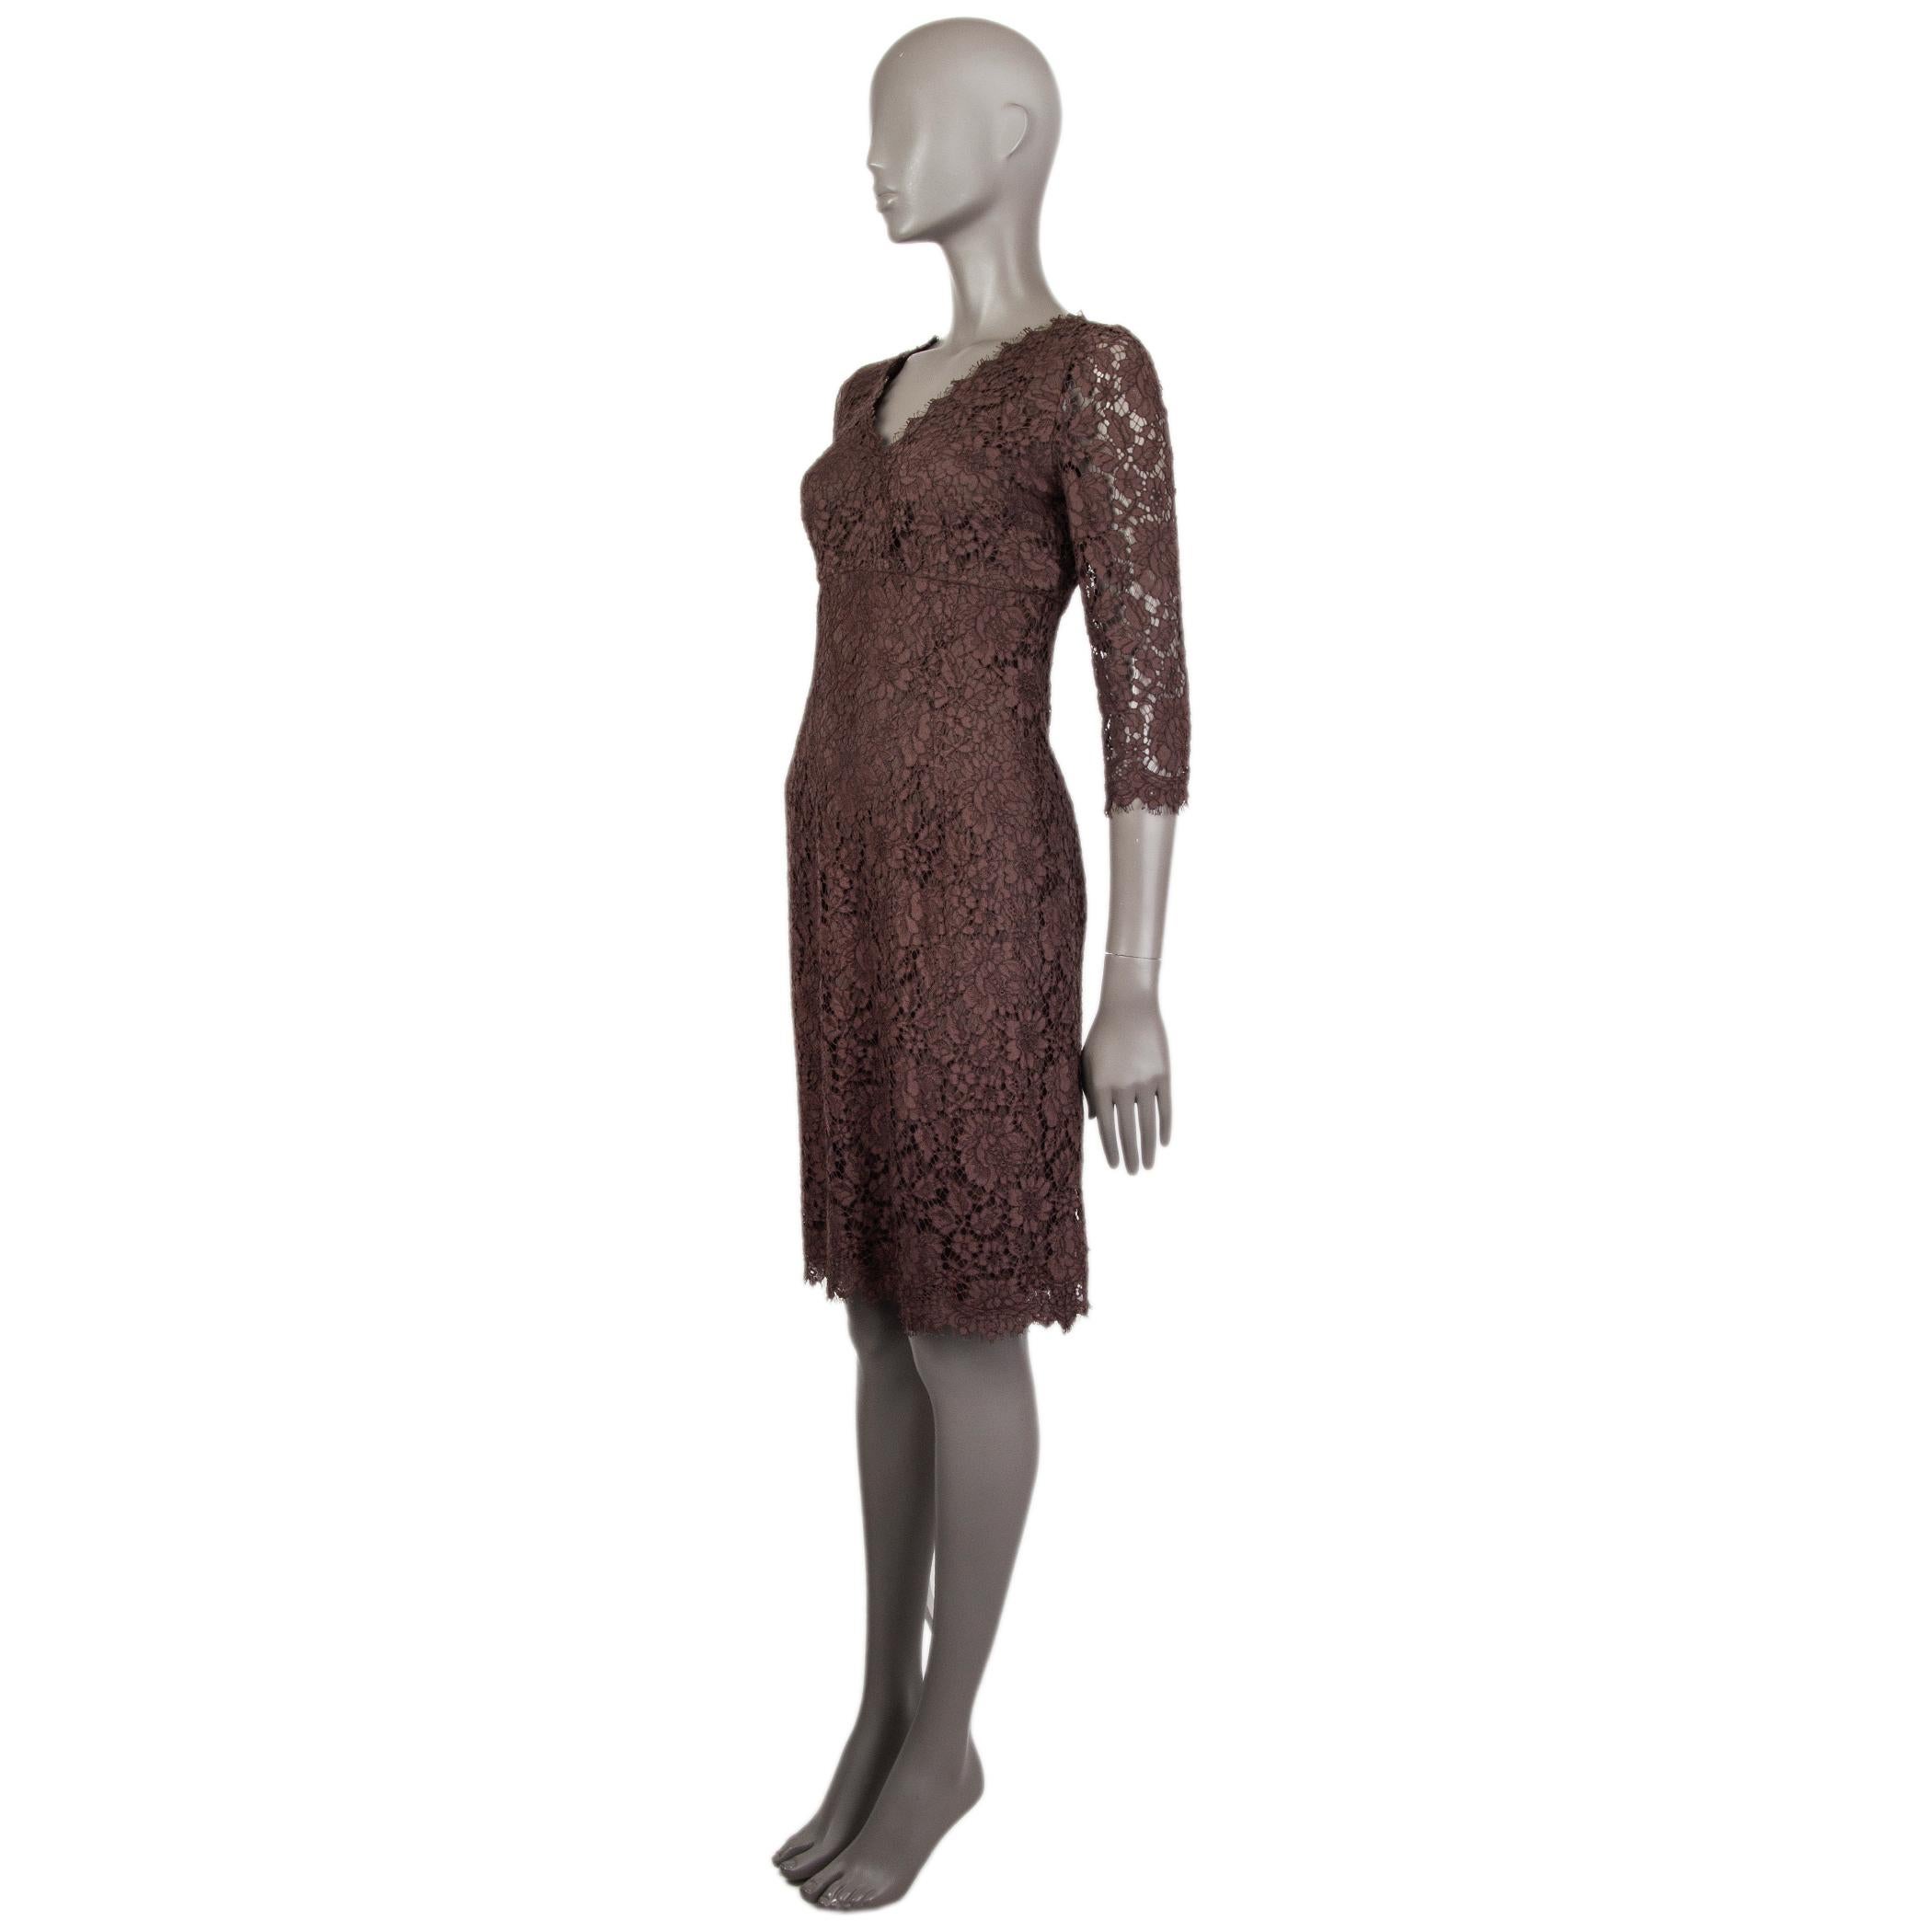 Dolve & Gabbana lace dress in brown cotton (79%), rayon (11%), and nylon (10%). With v neck and 3/4 sleeves. Closes with concealed zipper on the back. Lined in brown silk (85%), cotton (9%), elastane (4%), and nylon (2%). Has been worn and is in